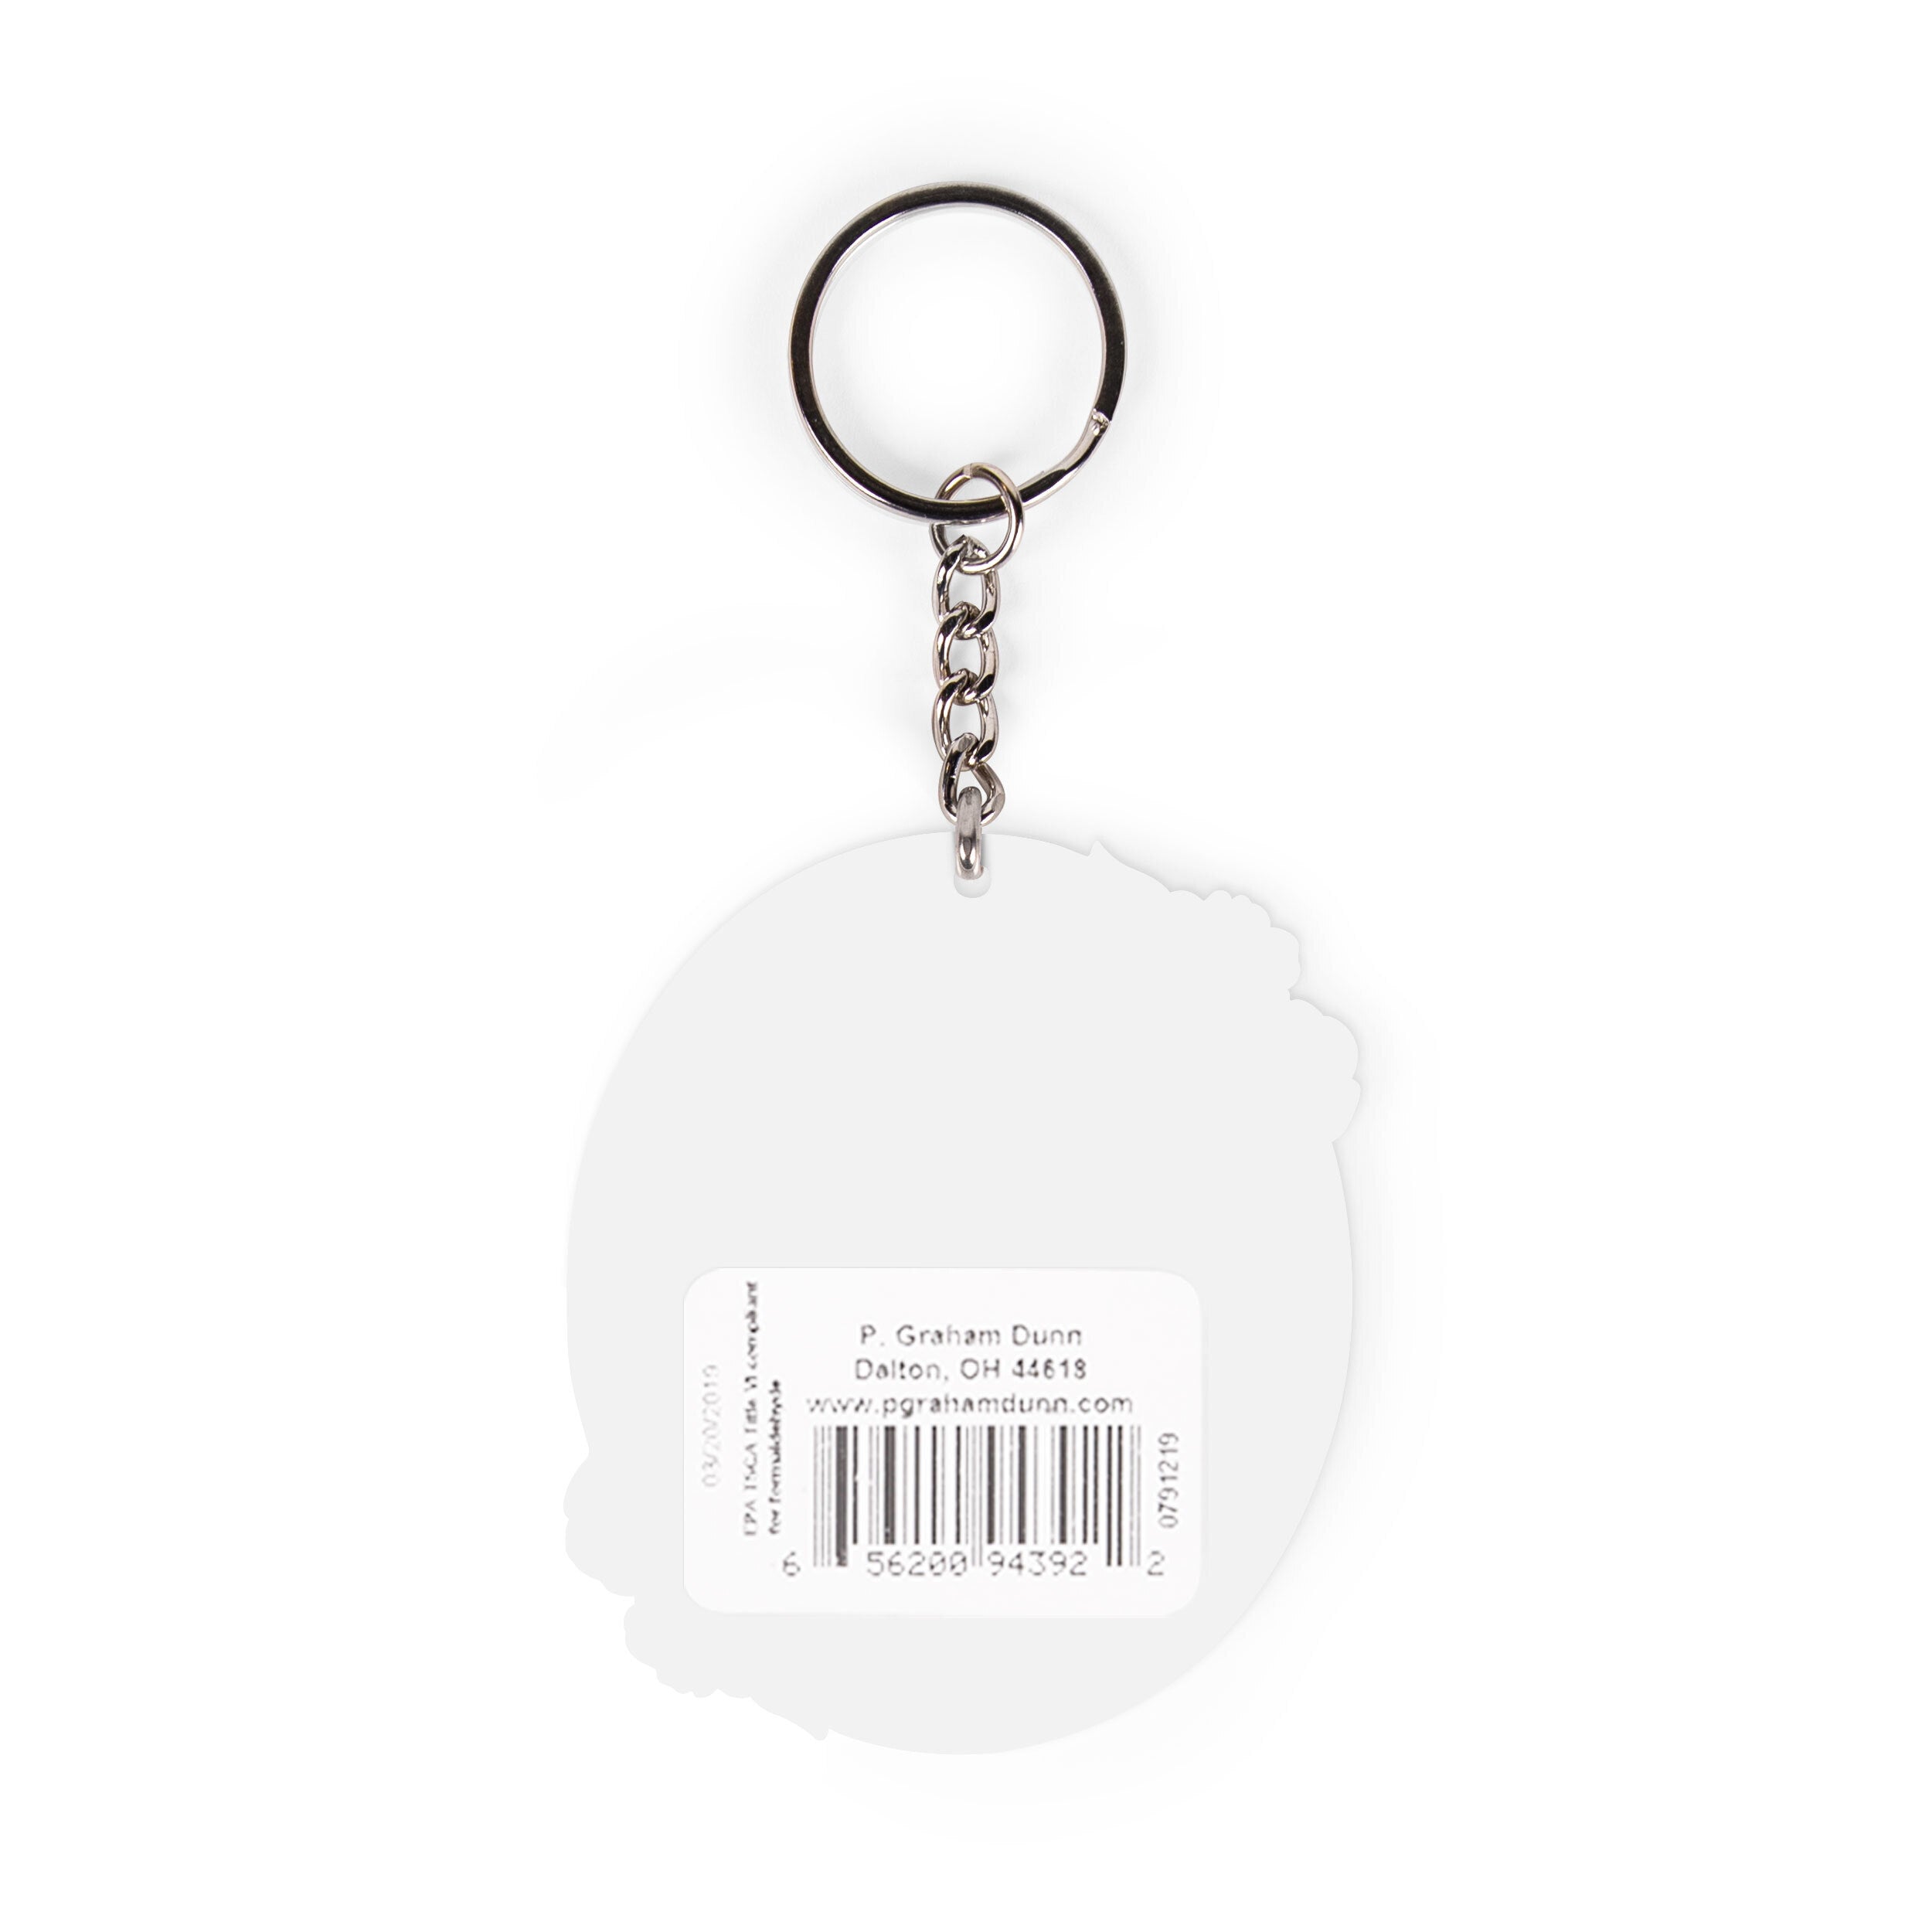 She Is More Precious Than Jewels Acrylic Oval Floral Shape Key Chain